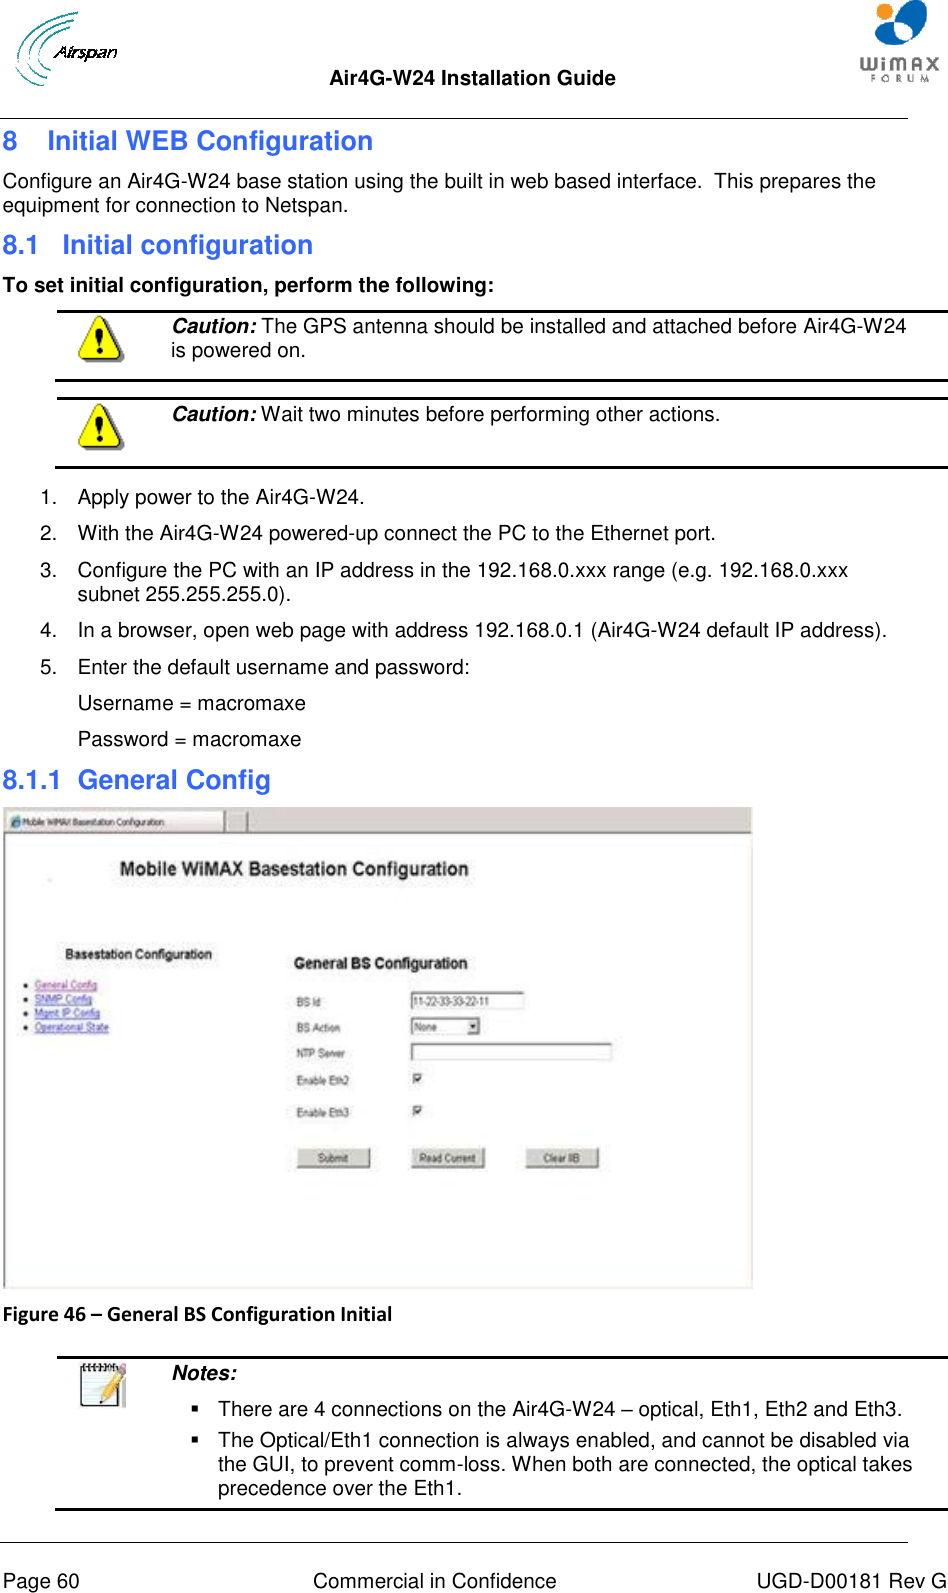  Air4G-W24 Installation Guide     Page 60  Commercial in Confidence  UGD-D00181 Rev G 8  Initial WEB Configuration Configure an Air4G-W24 base station using the built in web based interface.  This prepares the equipment for connection to Netspan. 8.1  Initial configuration To set initial configuration, perform the following:  Caution: The GPS antenna should be installed and attached before Air4G-W24 is powered on.   Caution: Wait two minutes before performing other actions.  1.  Apply power to the Air4G-W24. 2.  With the Air4G-W24 powered-up connect the PC to the Ethernet port. 3.  Configure the PC with an IP address in the 192.168.0.xxx range (e.g. 192.168.0.xxx subnet 255.255.255.0). 4.  In a browser, open web page with address 192.168.0.1 (Air4G-W24 default IP address). 5.  Enter the default username and password: Username = macromaxe Password = macromaxe 8.1.1  General Config  Figure 46 – General BS Configuration Initial    Notes:    There are 4 connections on the Air4G-W24 – optical, Eth1, Eth2 and Eth3.   The Optical/Eth1 connection is always enabled, and cannot be disabled via the GUI, to prevent comm-loss. When both are connected, the optical takes precedence over the Eth1.  